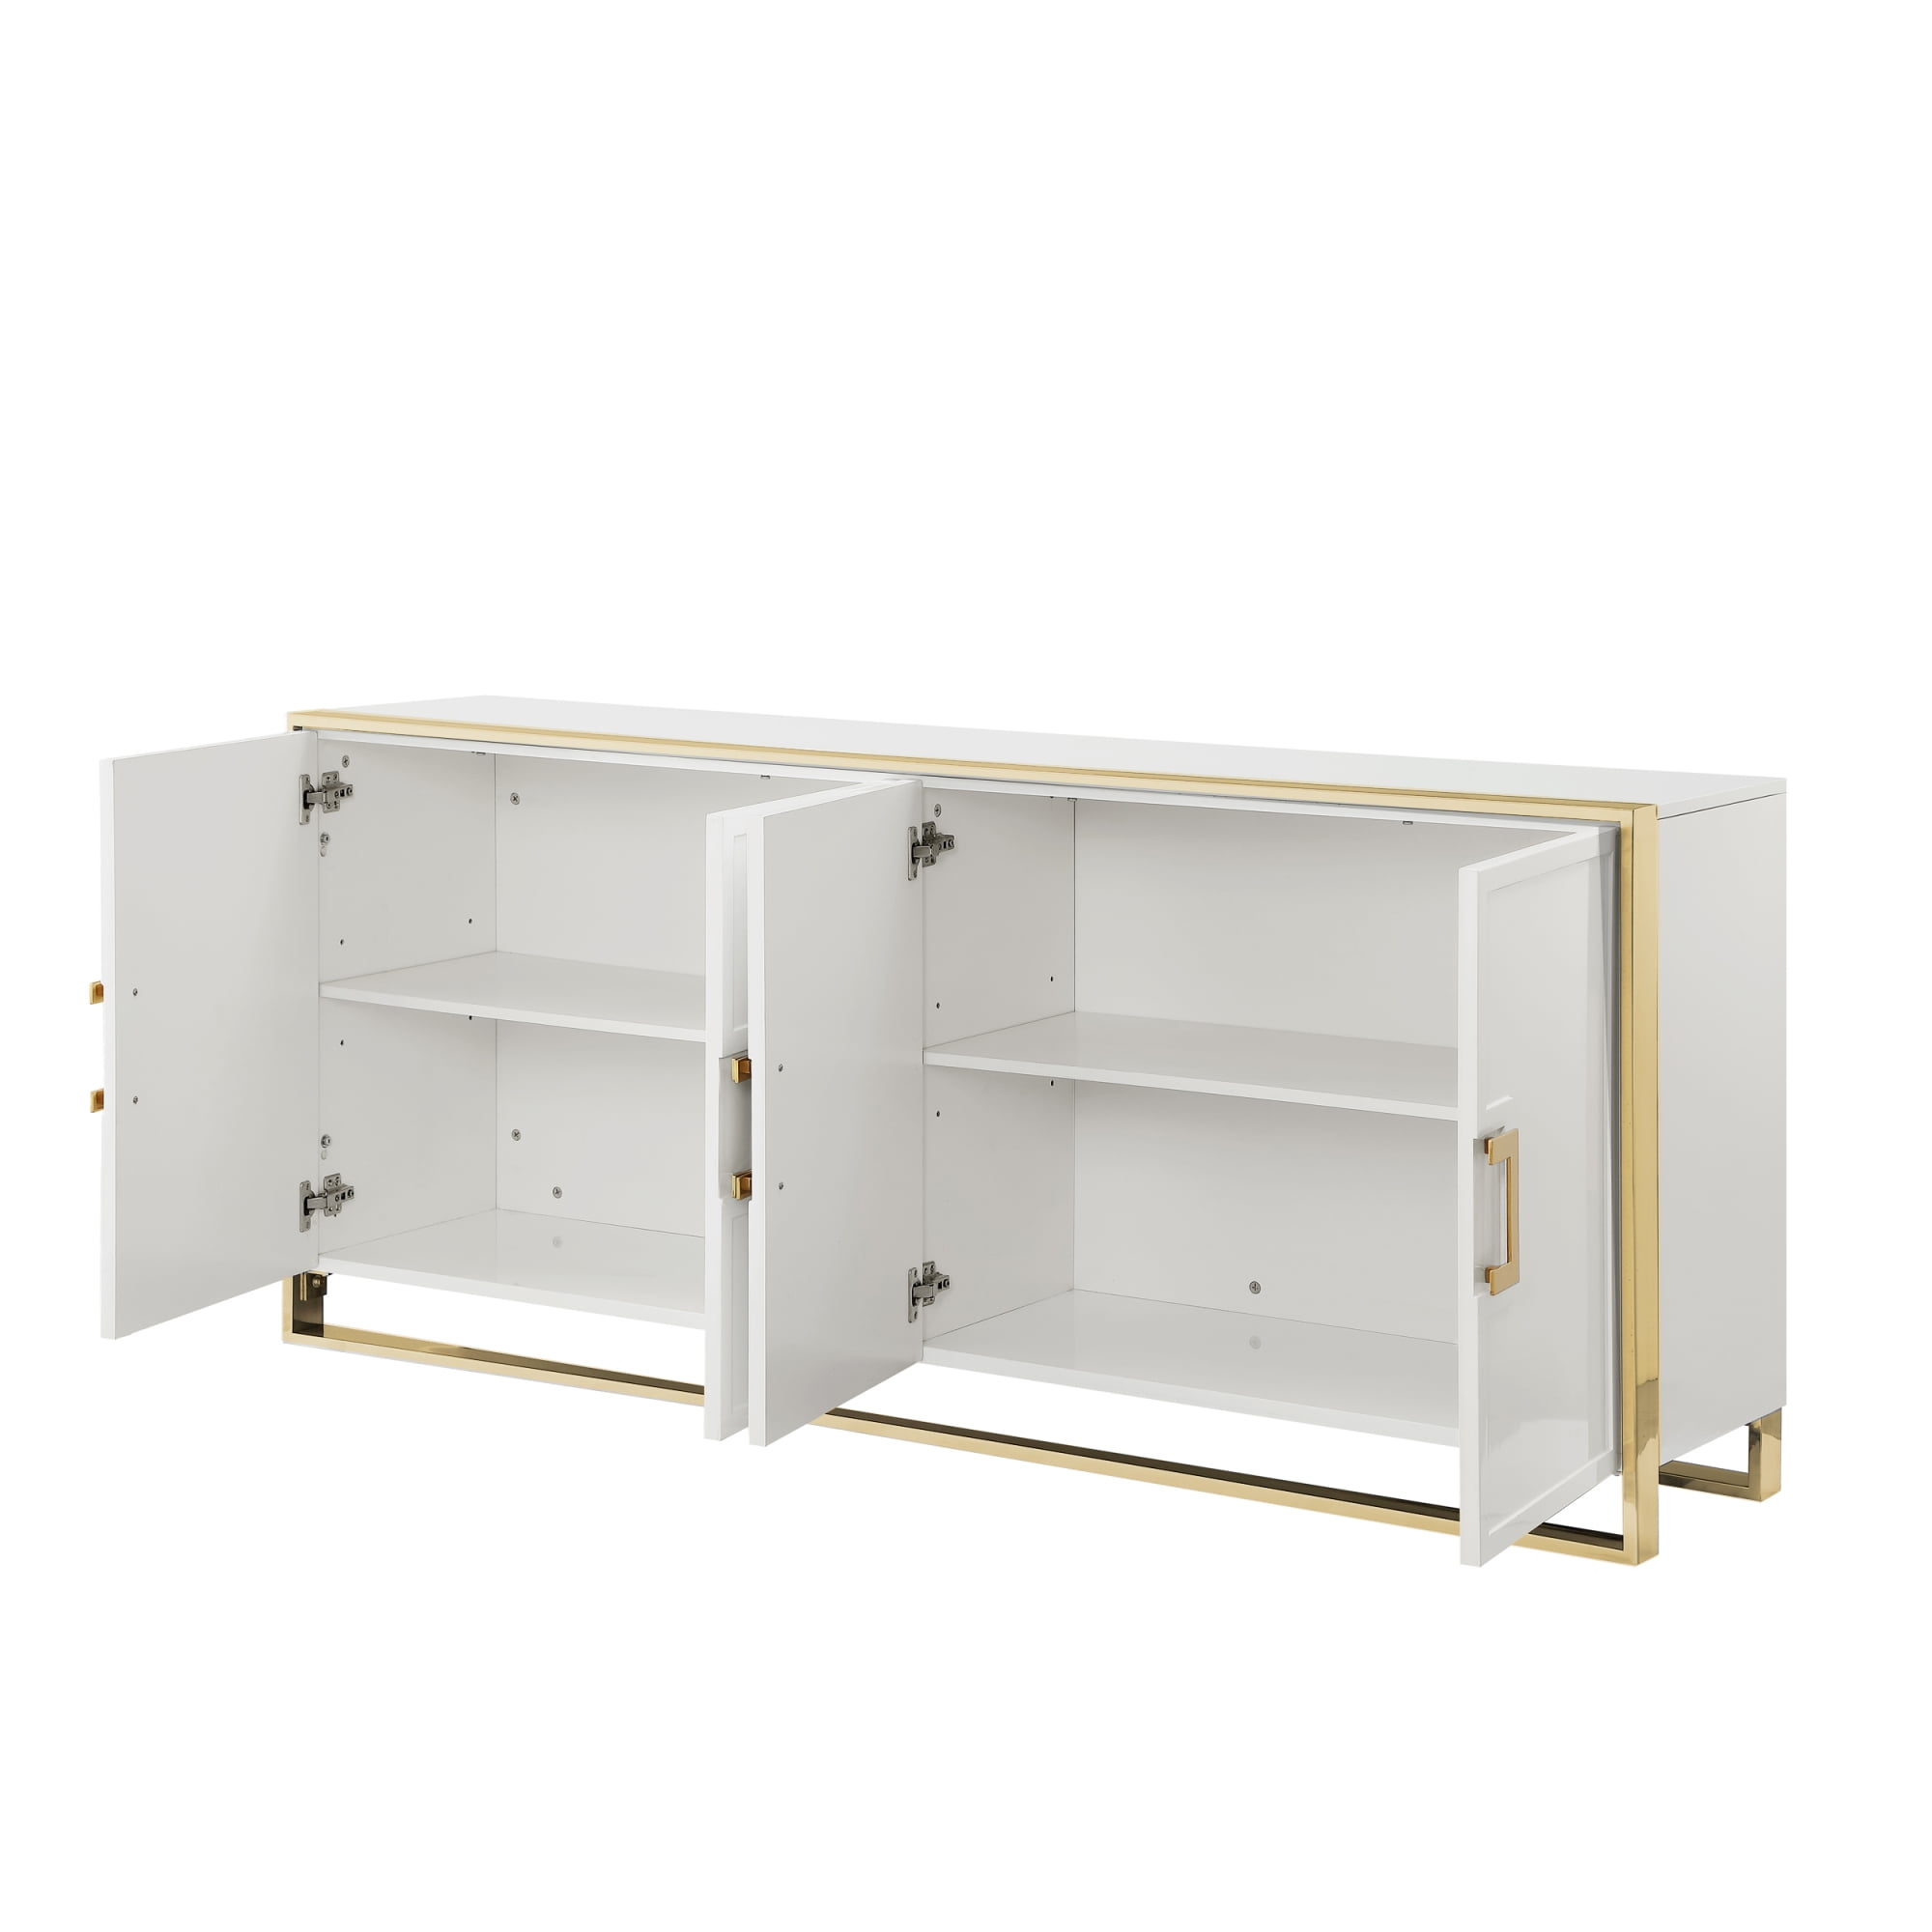  Aisurun Storage Cabinet Sideboard Buffet Cabinet Storage  Cupboard with 4 Doors & Square Metal Legs for Living Room Kitchen Entryway  (White) - Buffets & Sideboards